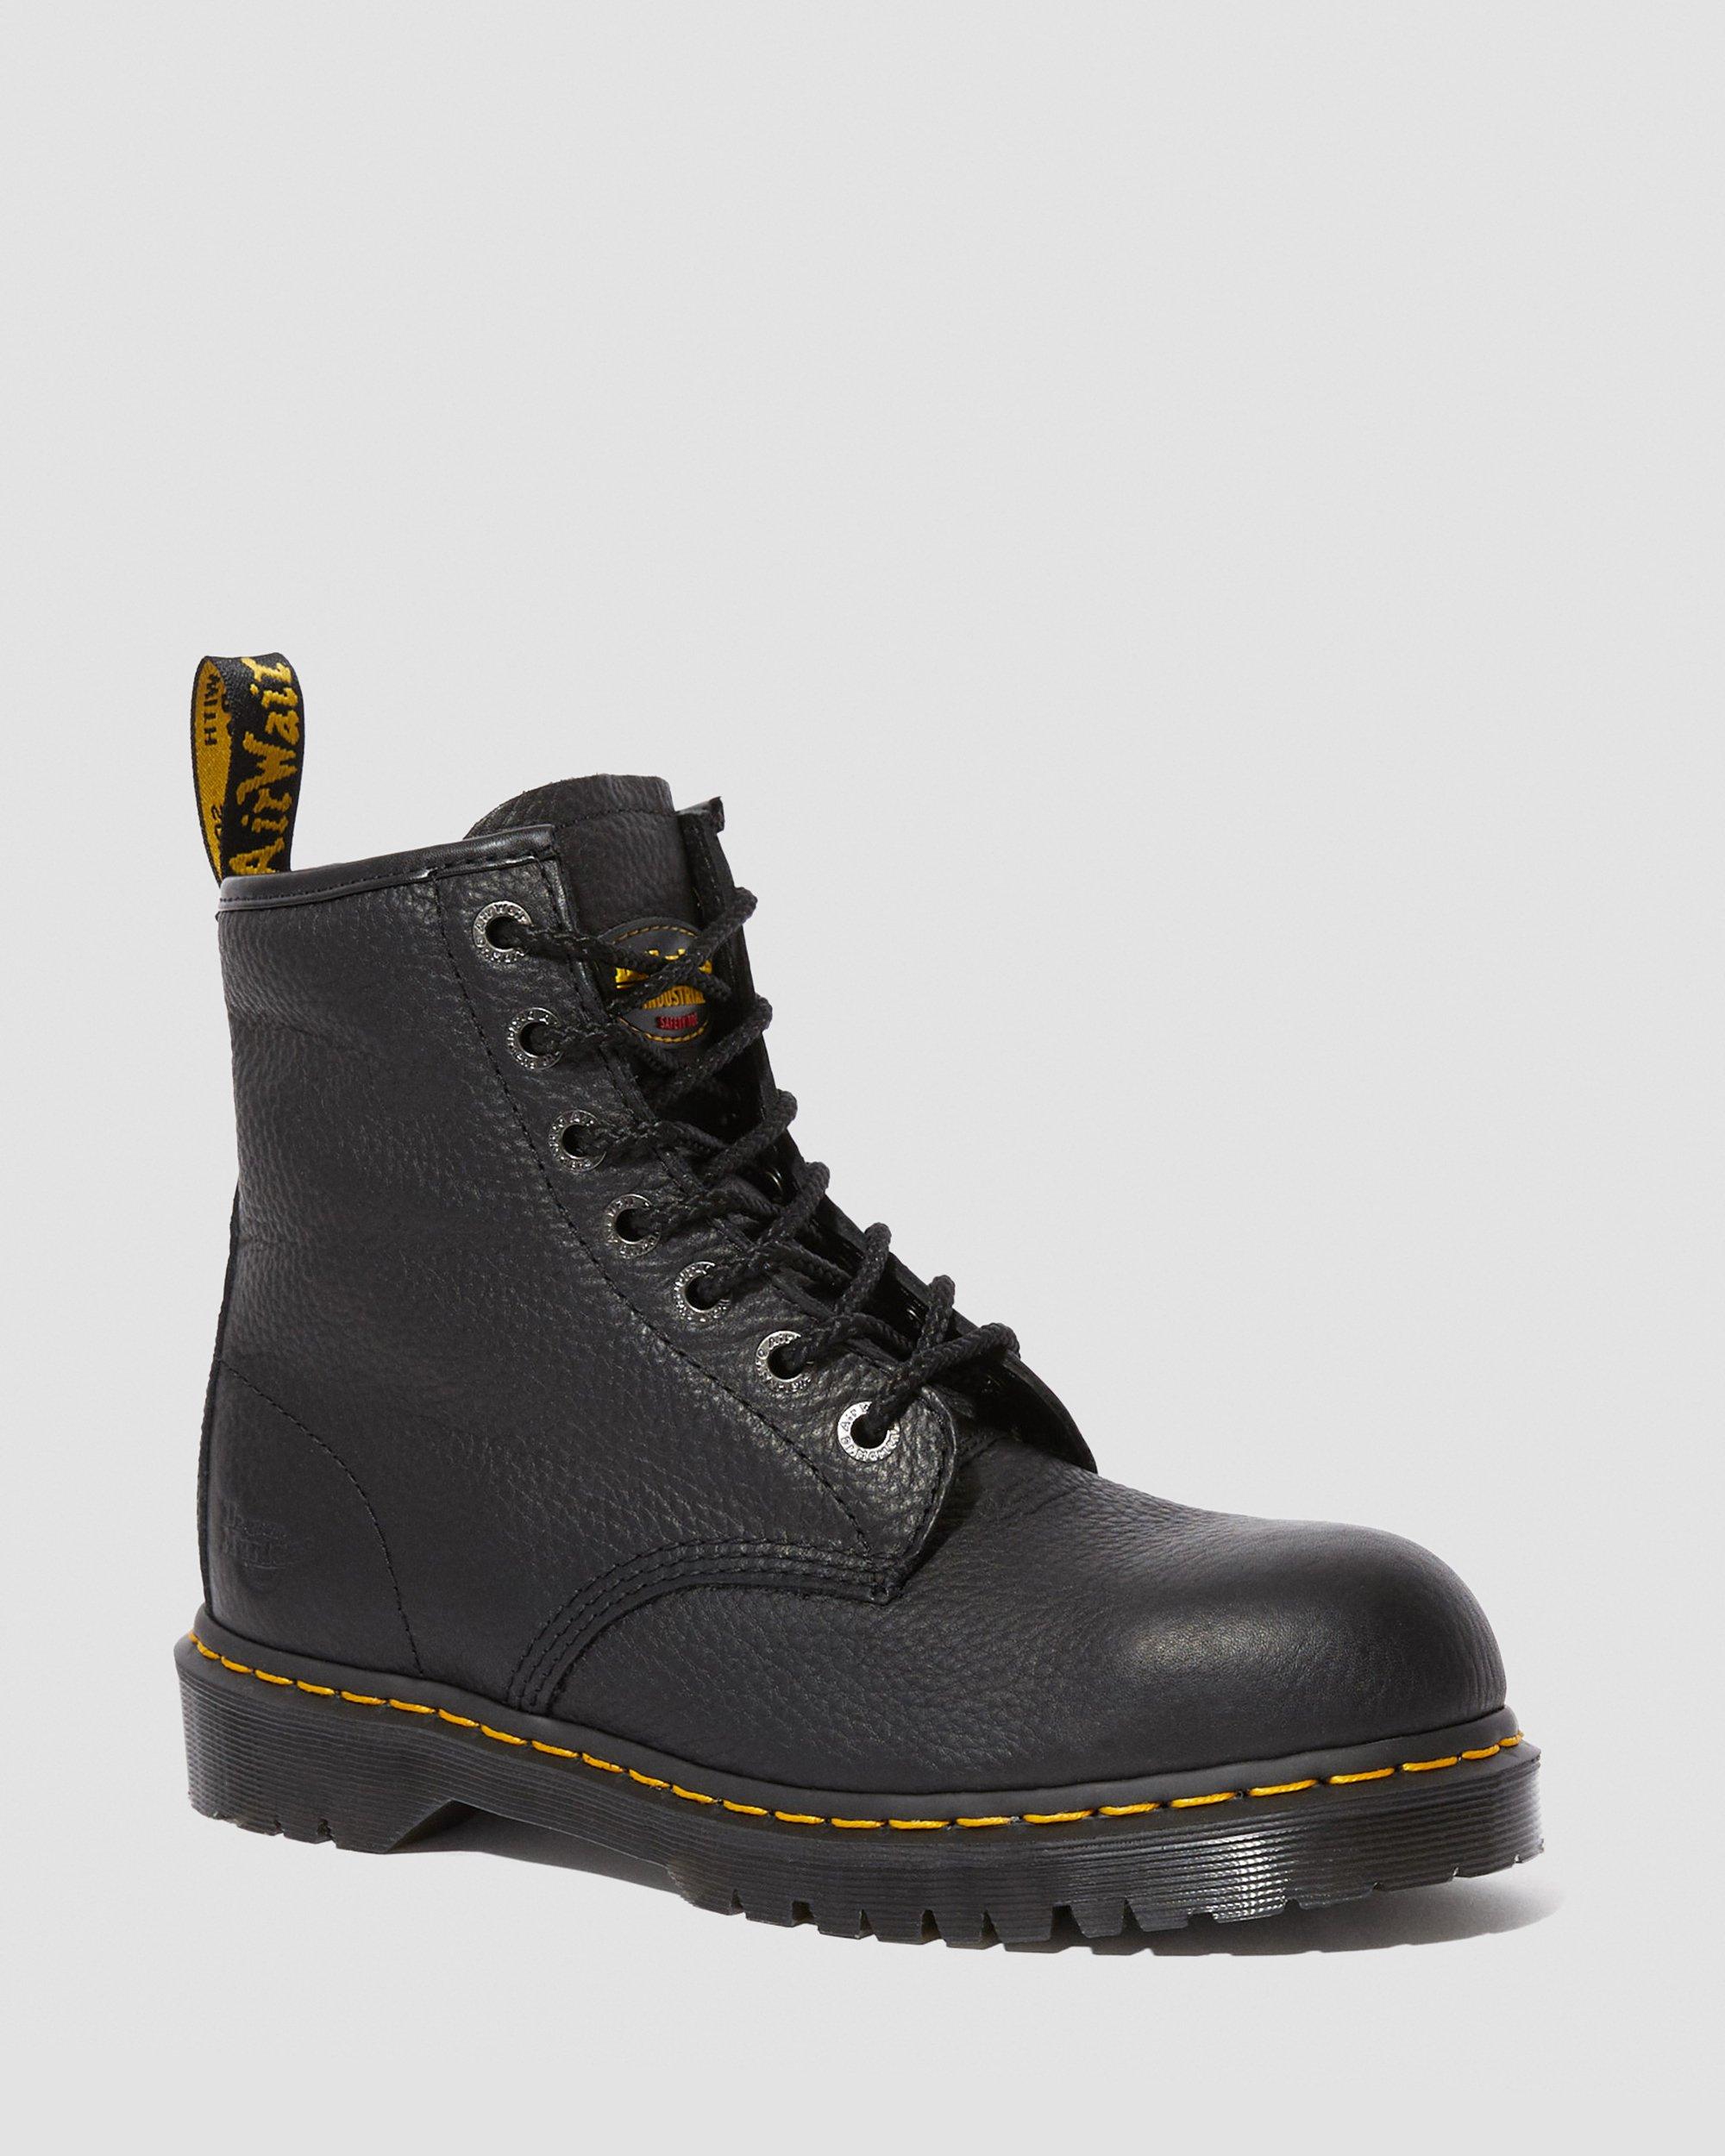 ICON 7B10 LEATHER STEEL TOE WORK BOOTS 